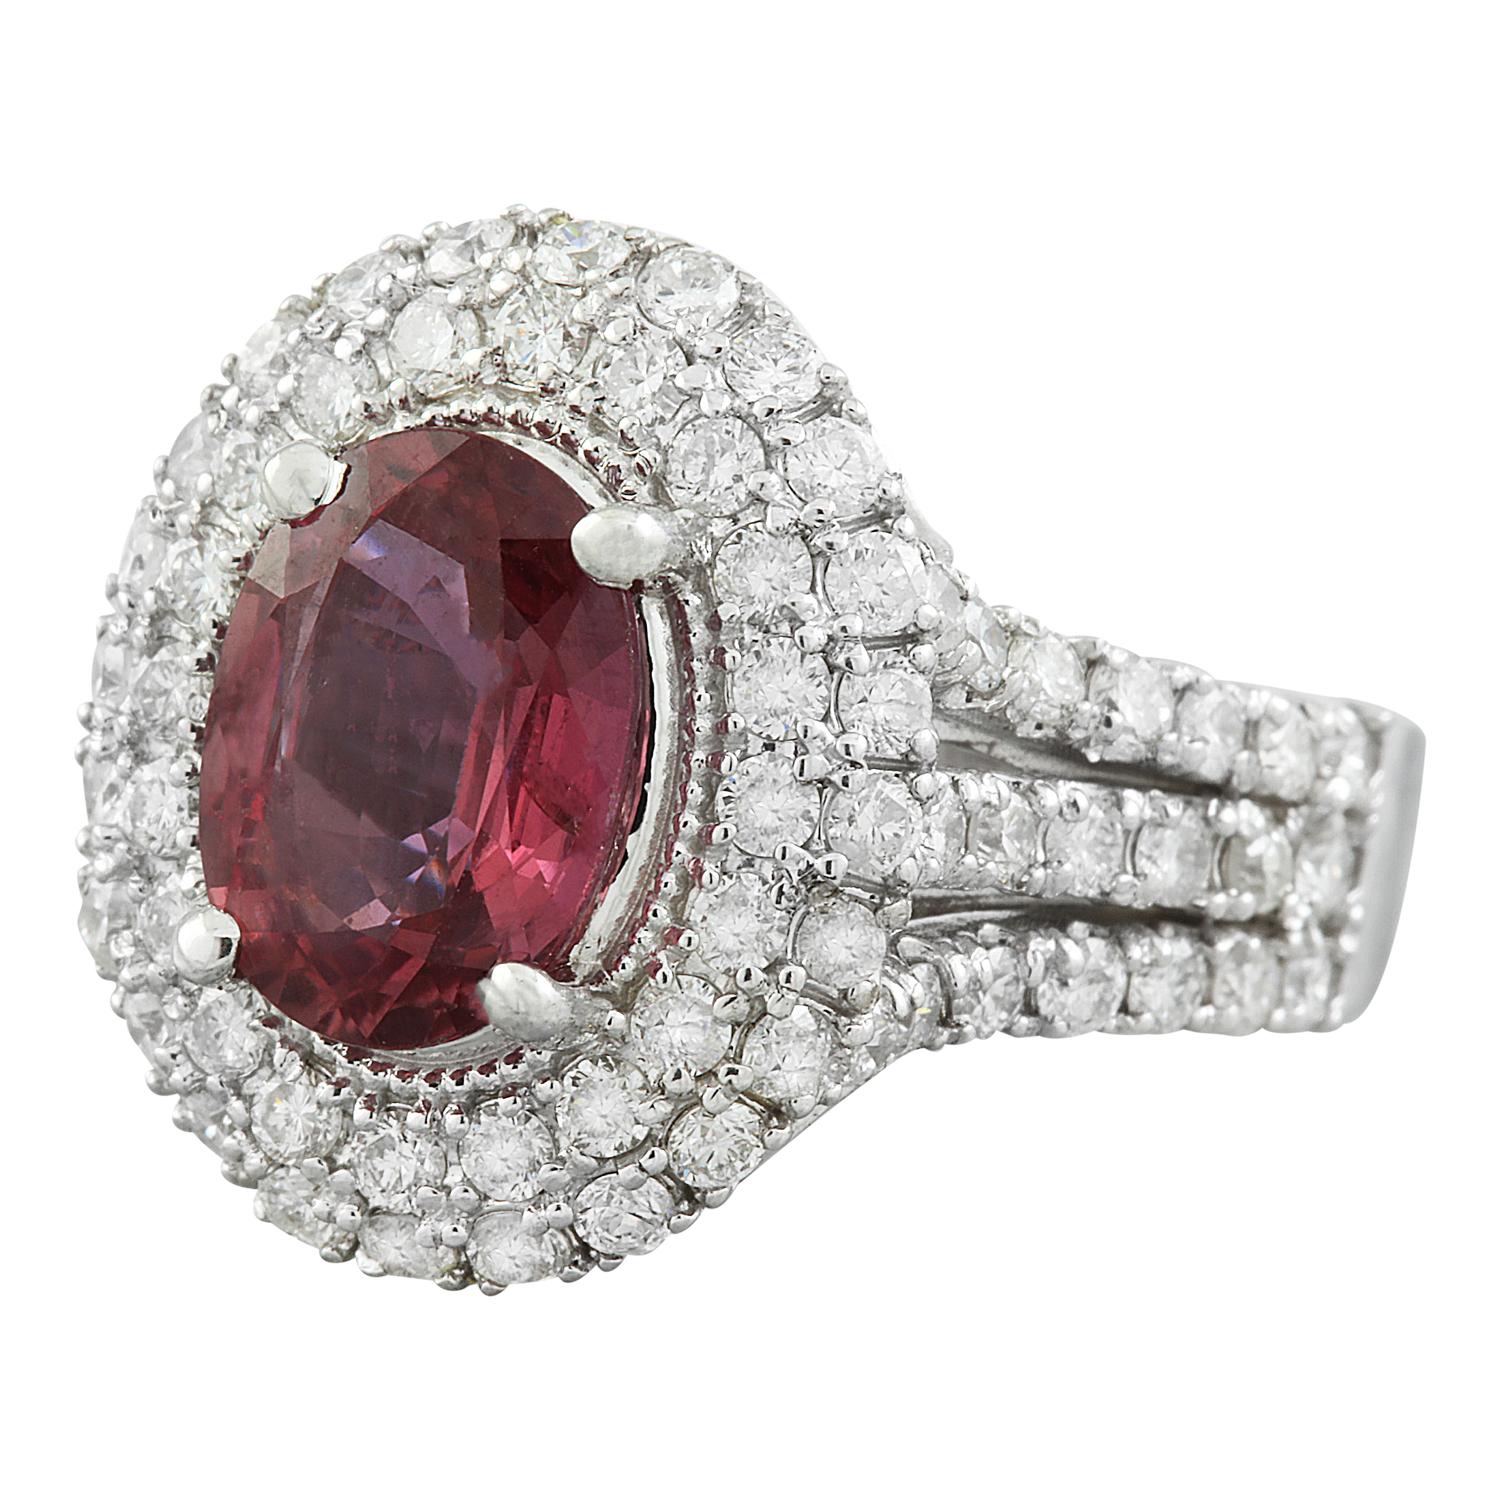 4.00 Carat Natural Tourmaline 14 Karat Solid White Gold Diamond Ring
Stamped: 14K 
Total Ring Weight: 7.7 Grams 
Tourmaline Weight 2.56 Carat (9.00x7.00 Millimeters)
Diamond Weight: 1.44 carat (F-G Color, VS2-SI1 Clarity)
Face Measures: 16.85x14.60